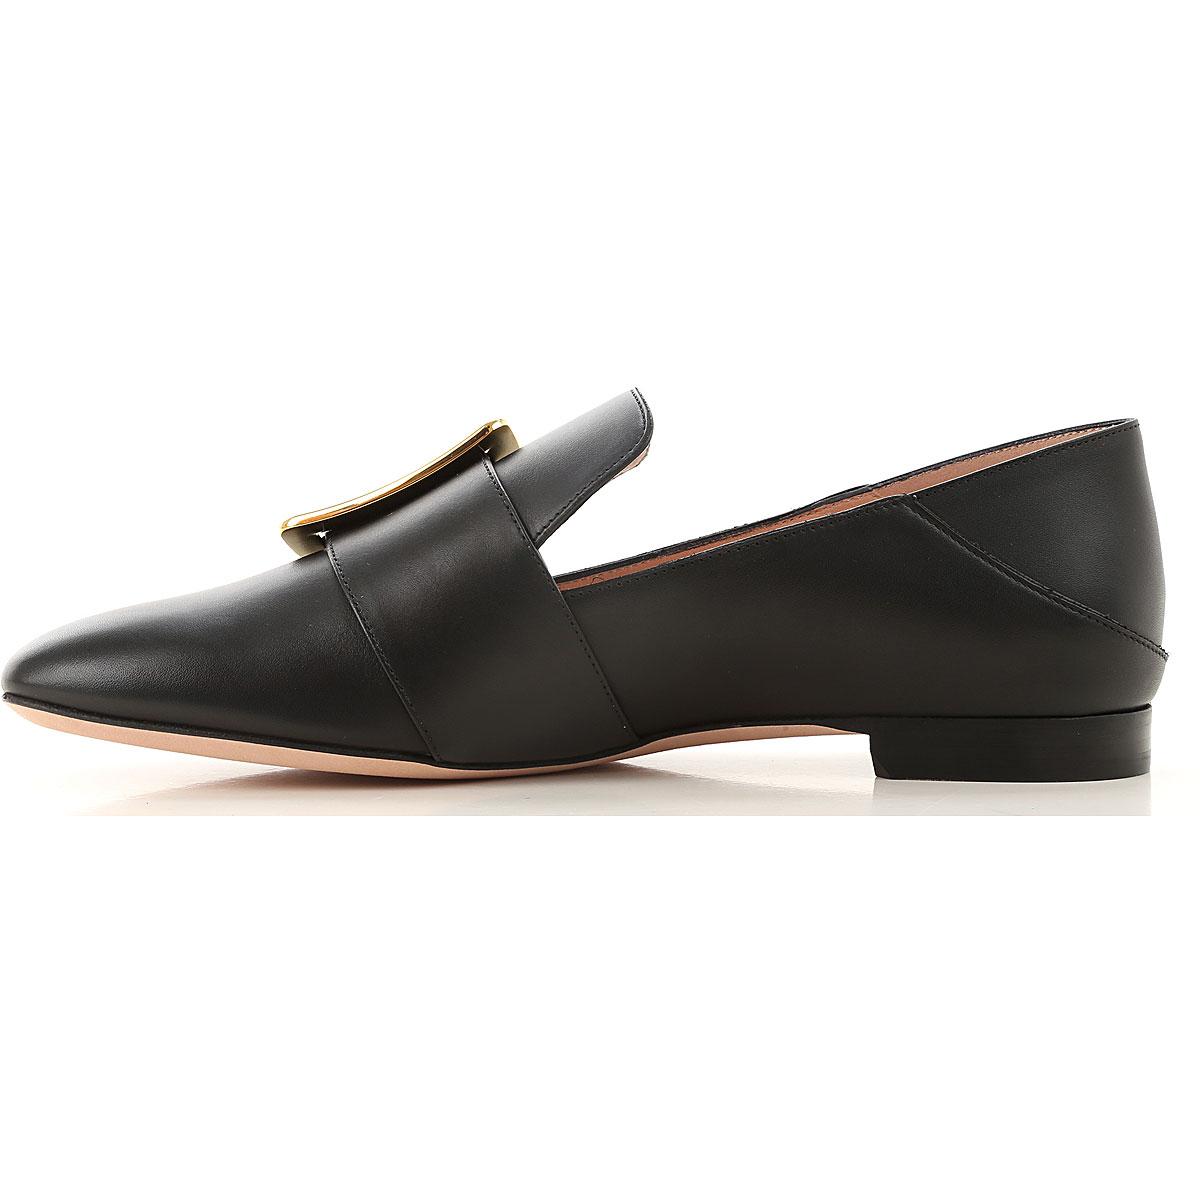 Bally Loafers For Women in Black - Lyst